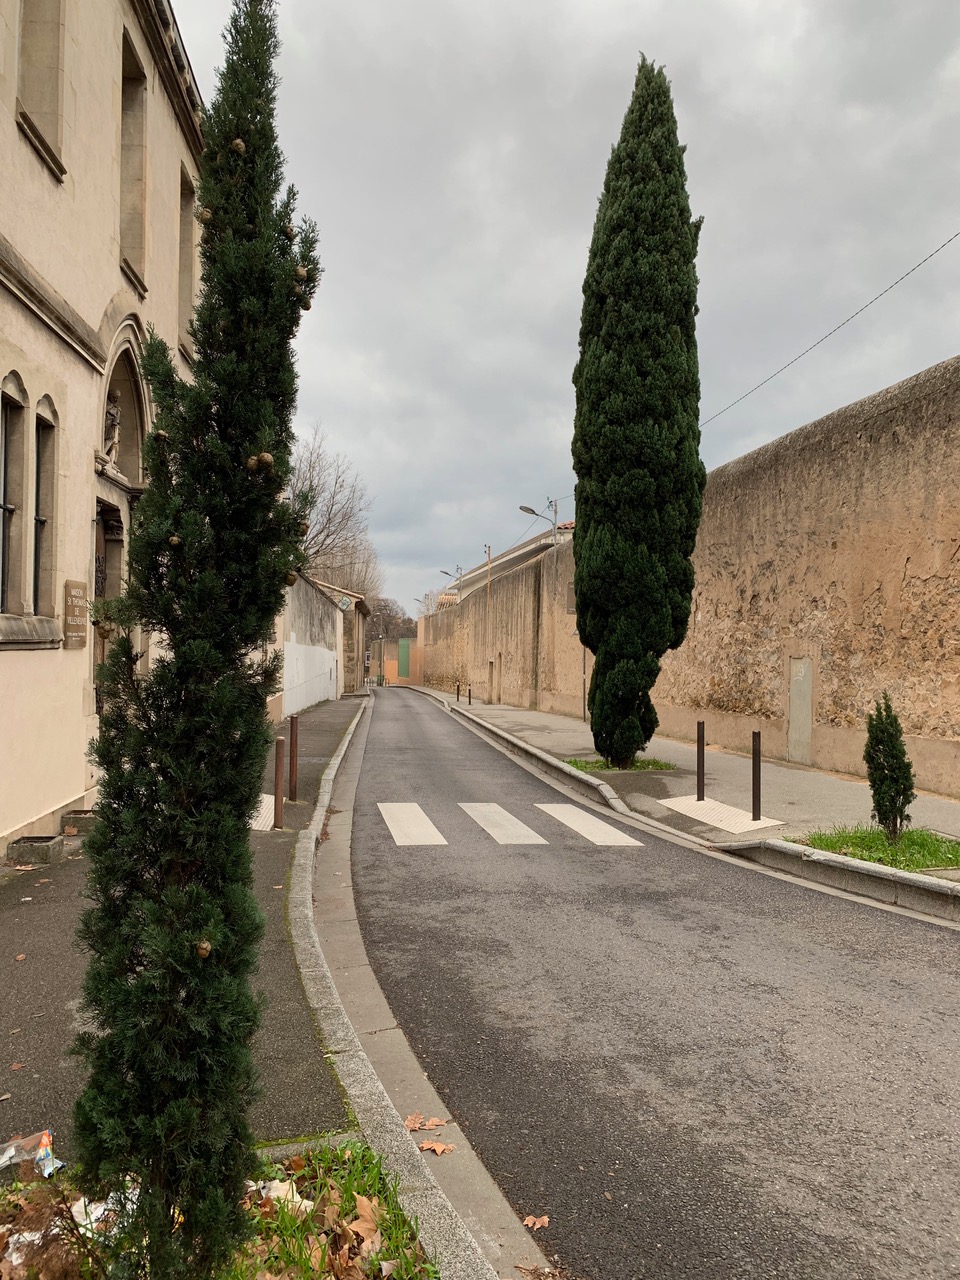 A narrow street in Aix with sandstone buildings and tall, narrow, trees